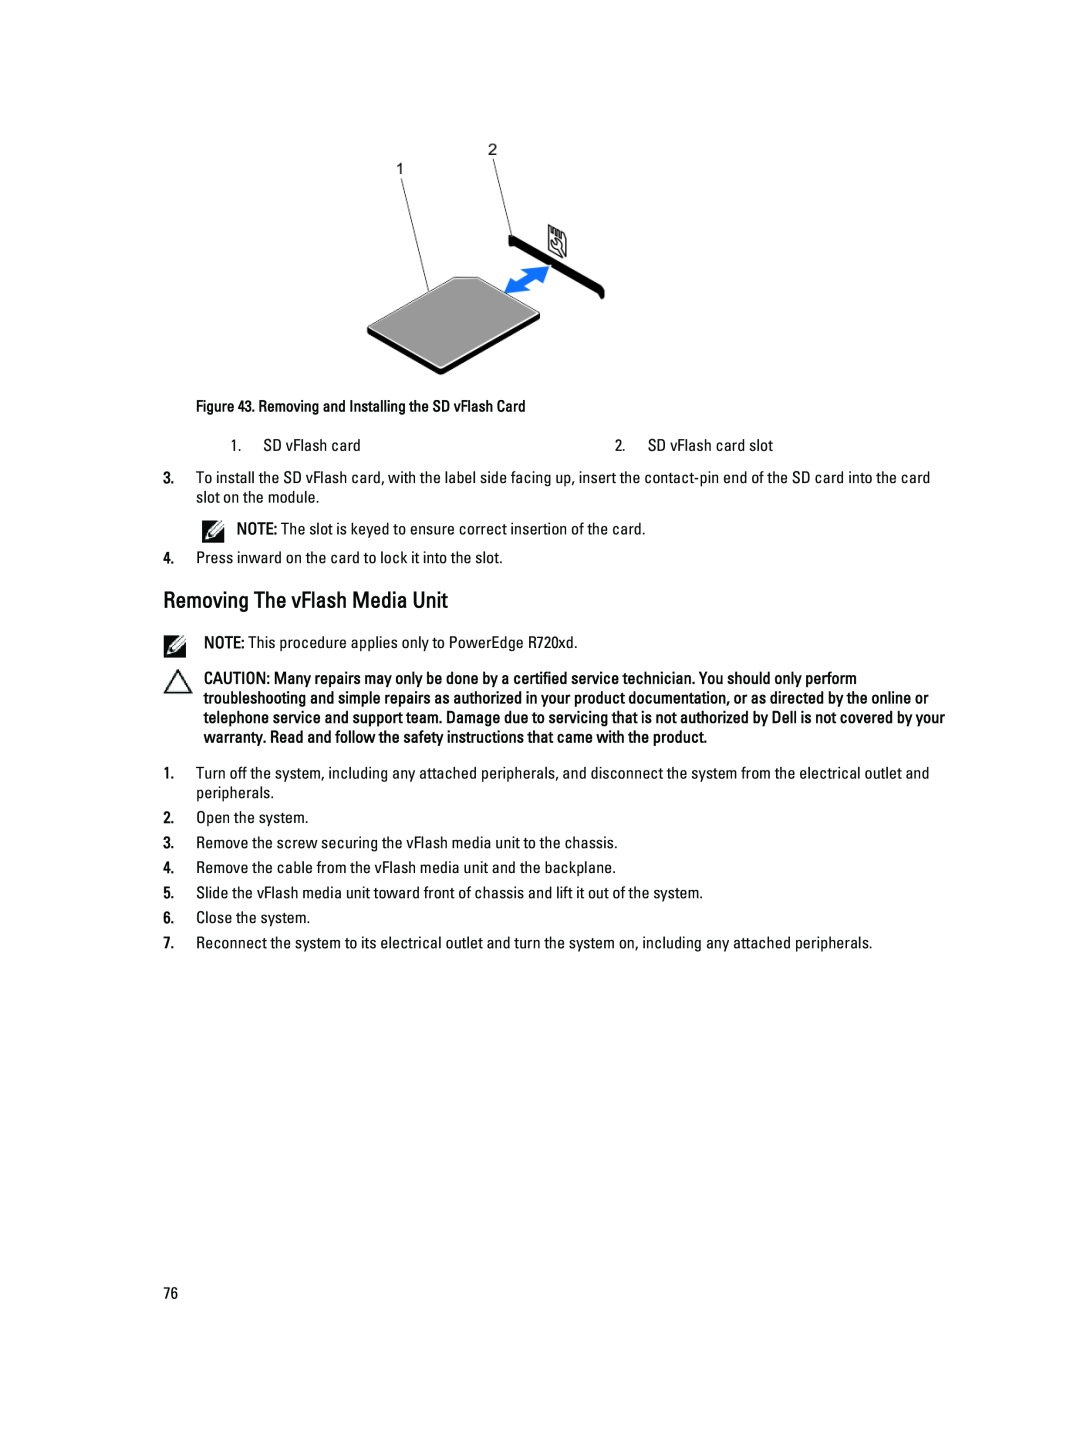 Dell R720XD owner manual Removing The vFlash Media Unit 